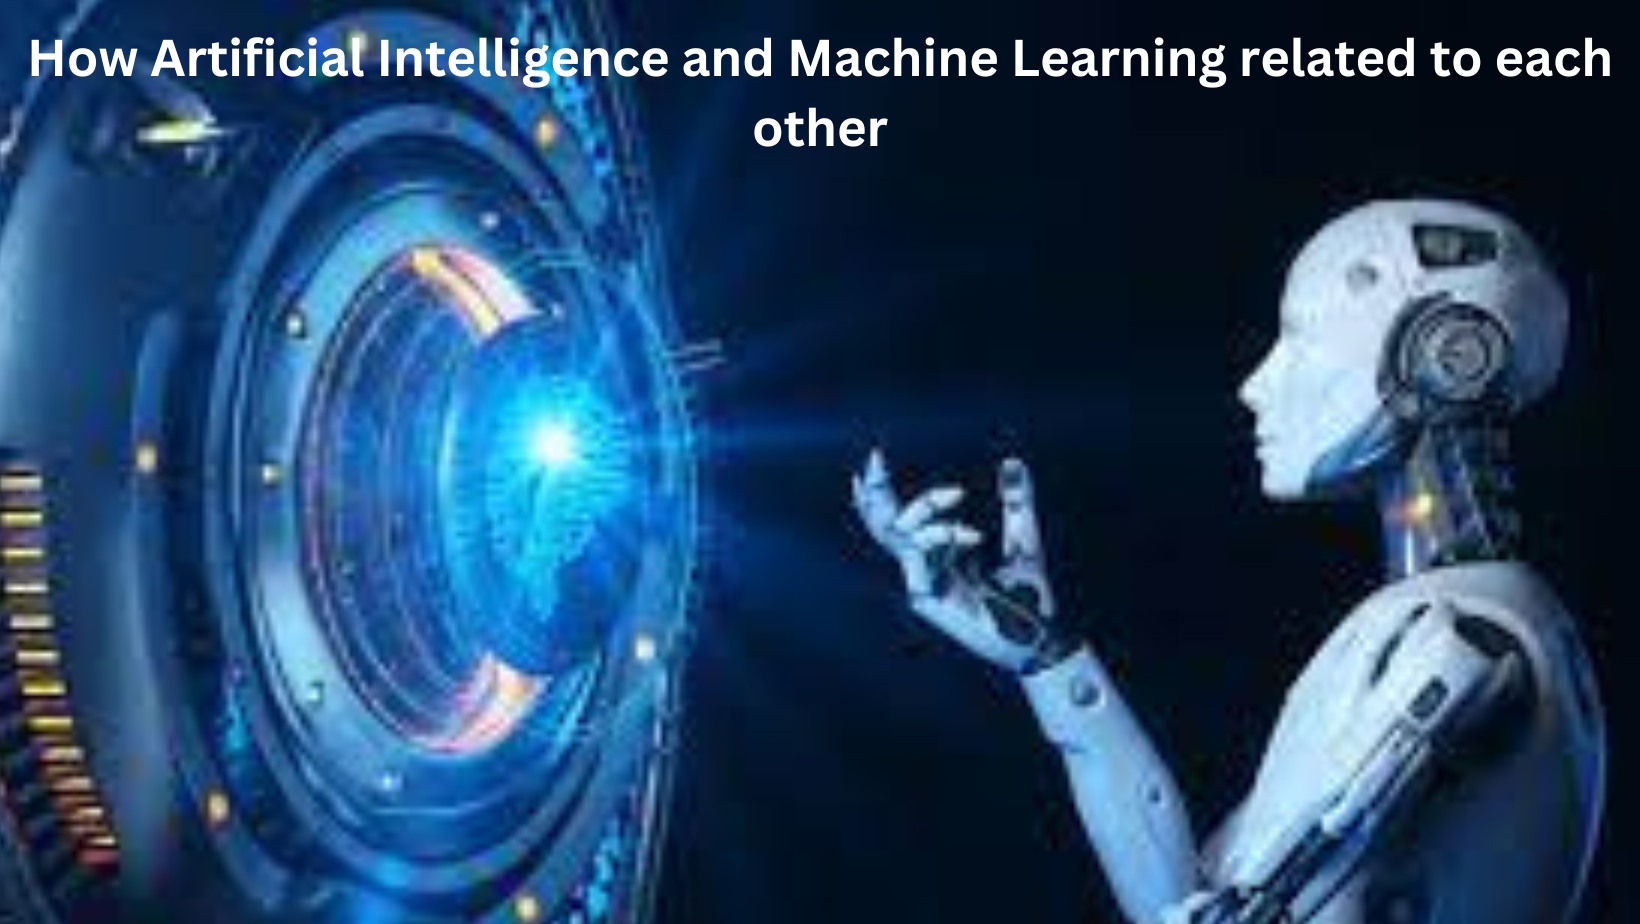 How Artificial Intelligence and Machine Learning related to each other